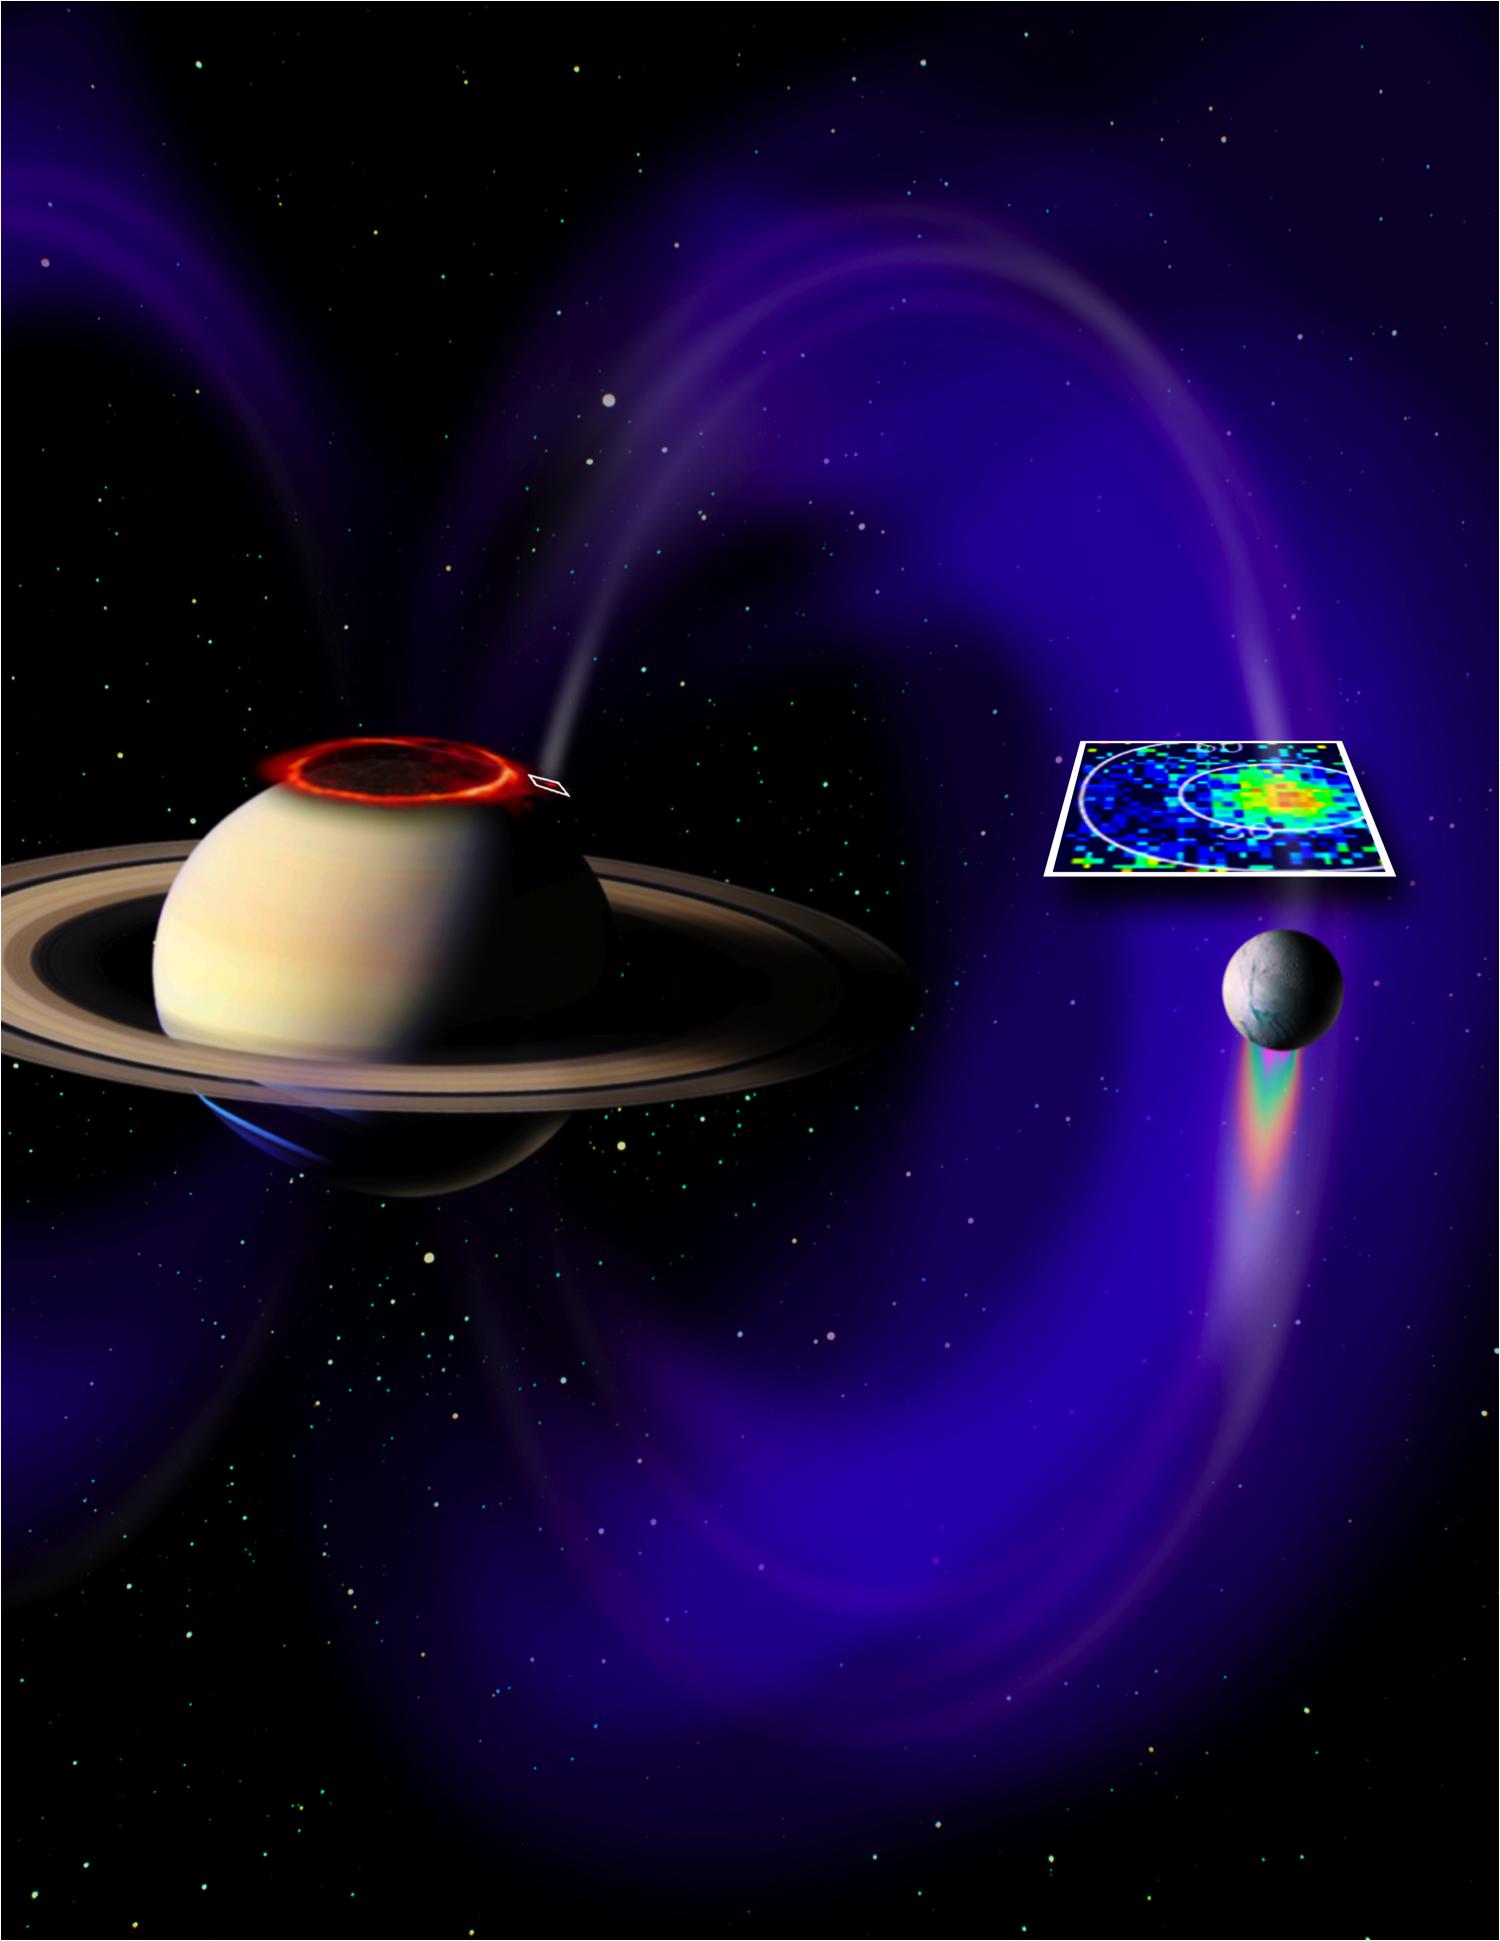 This artist's concept shows the magnetic connection between Saturn and its moon Enceladus